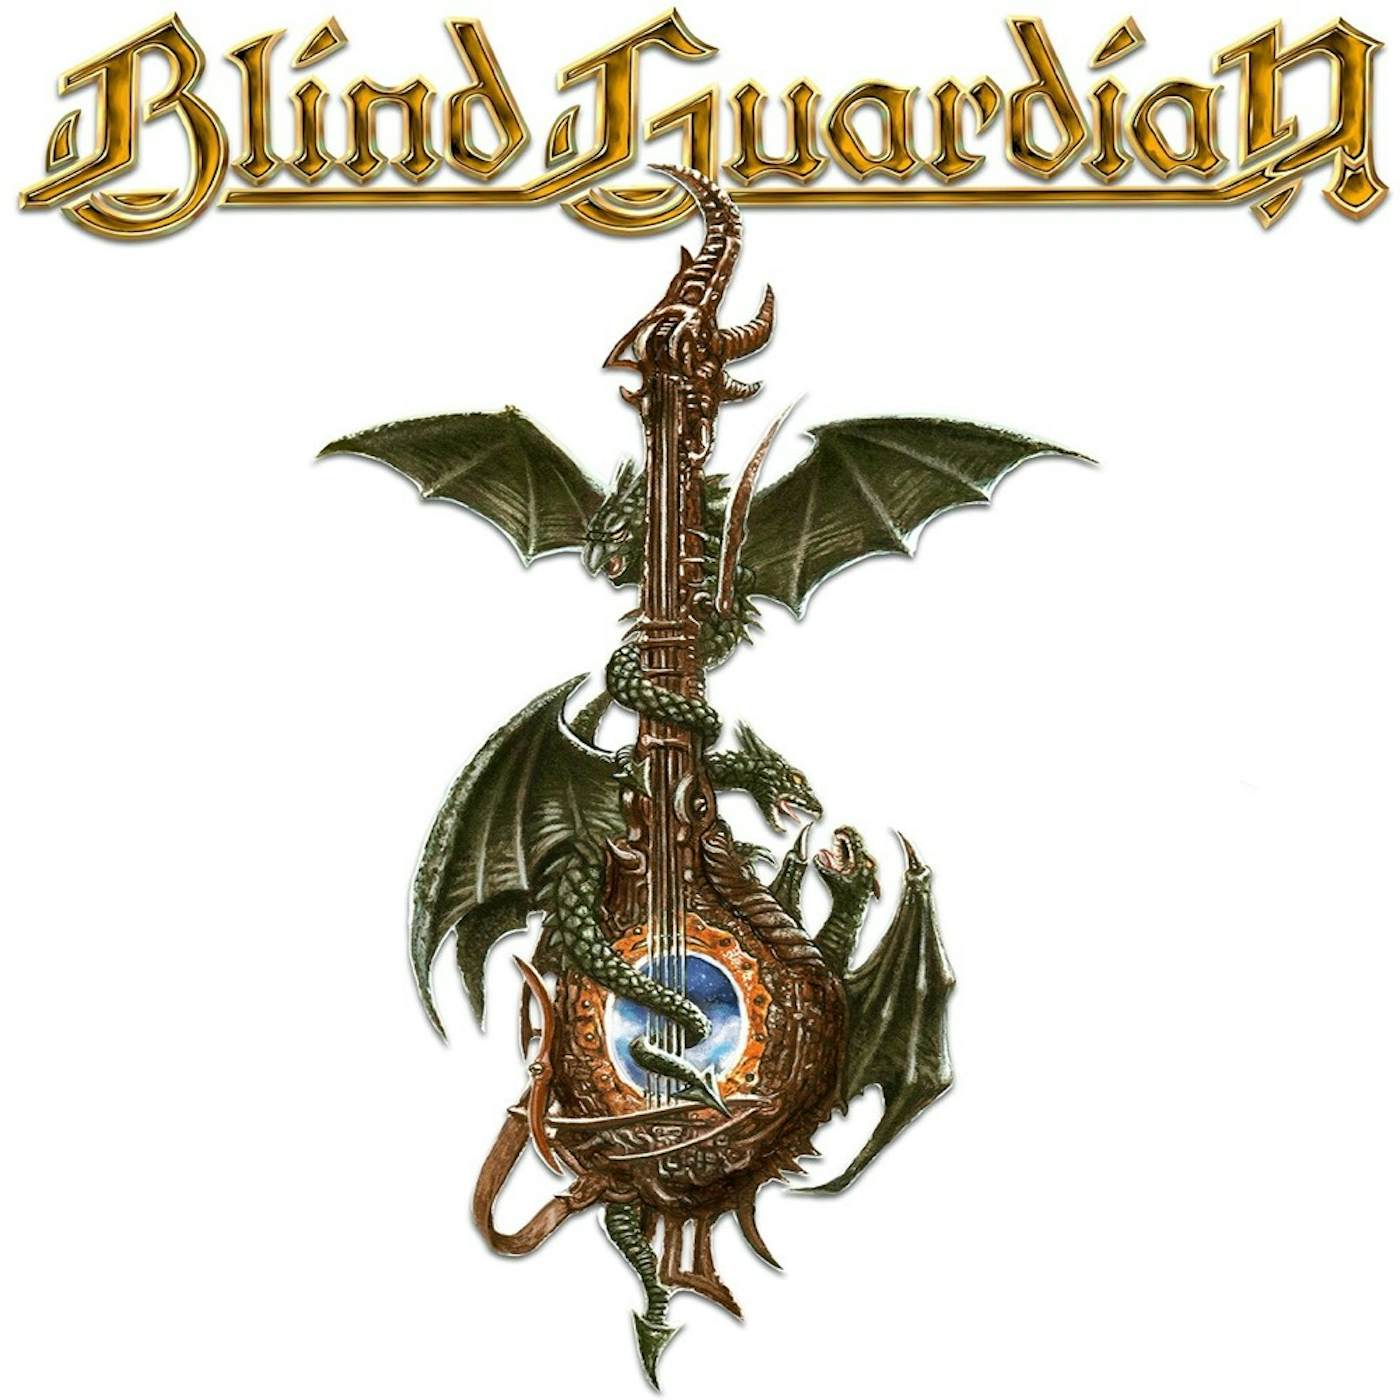 Blind Guardian IMAGINATIONS FROM THE OTHER SIDE 25TH ANNIVERSARY CD